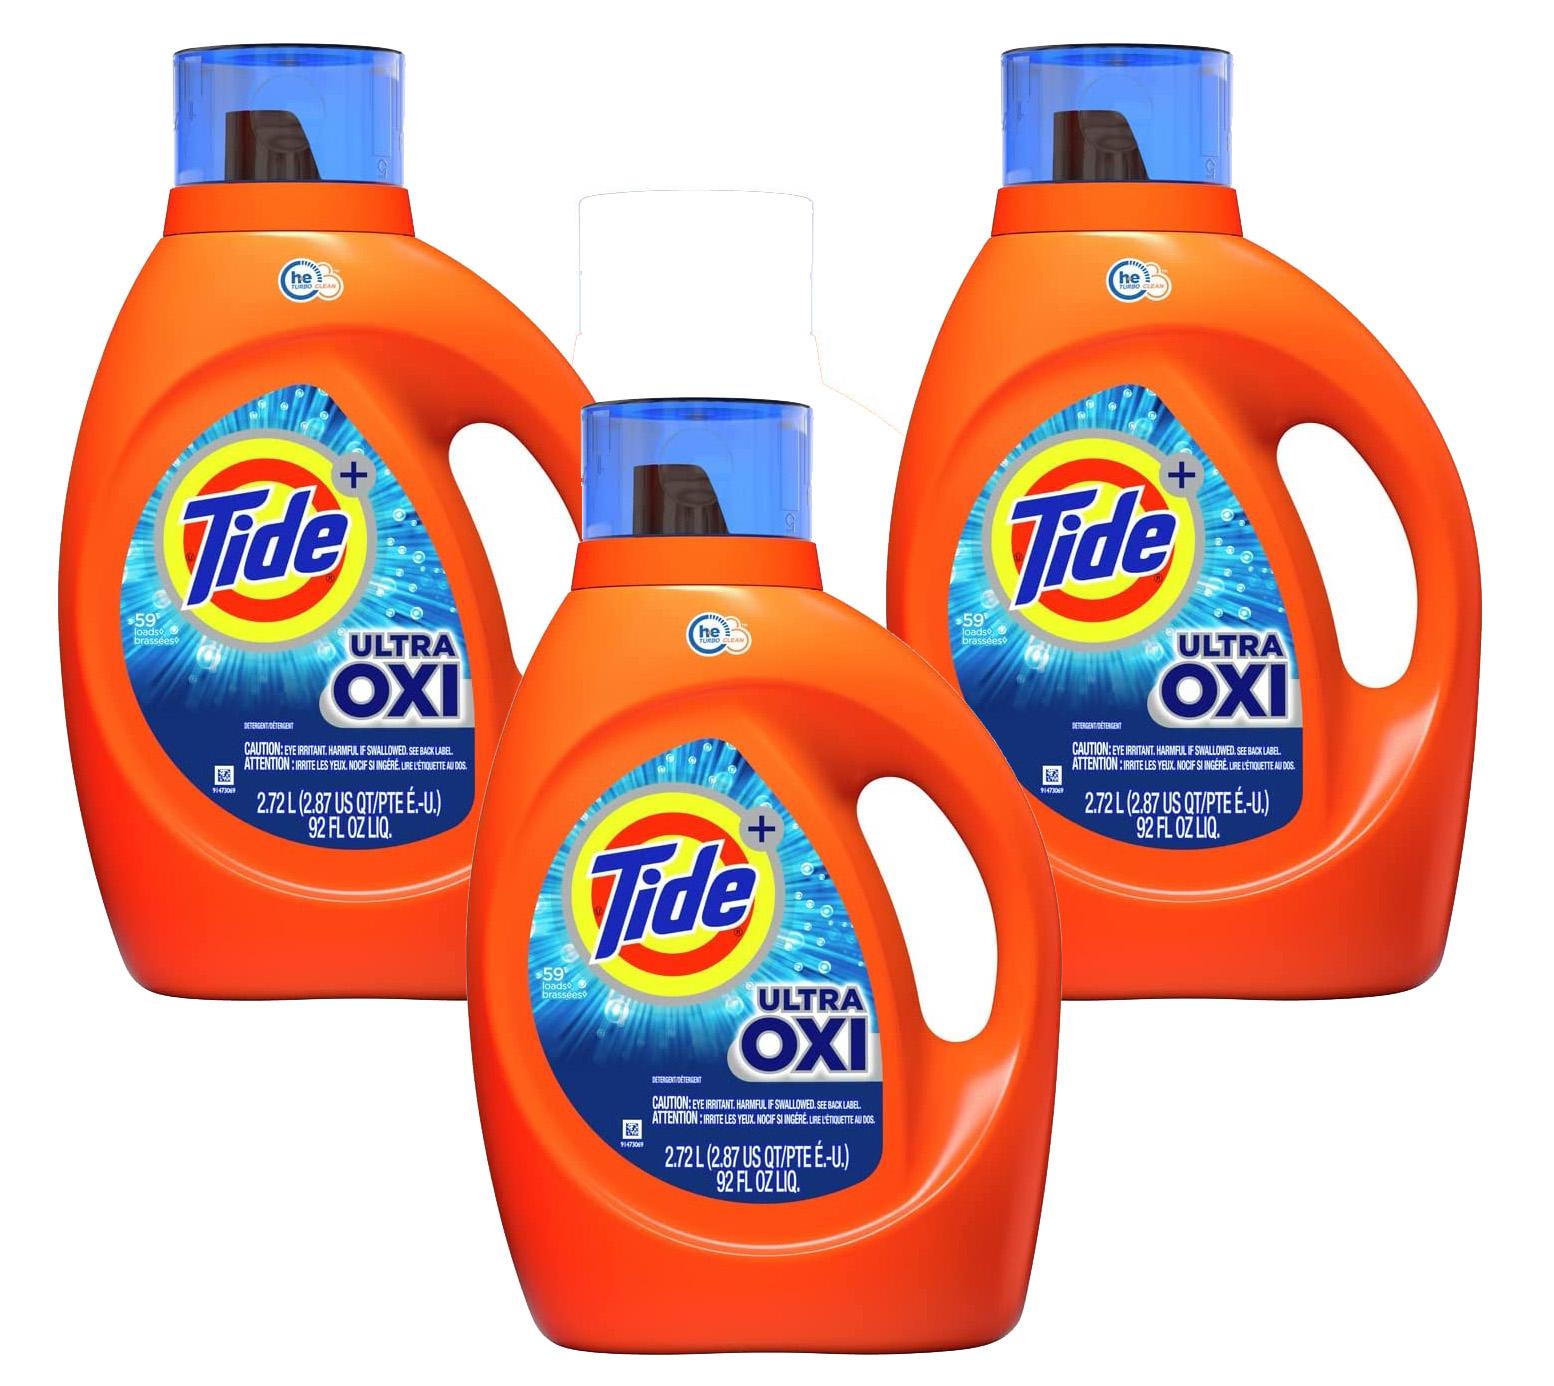 Tide Ultra Oxi Liquid Laundry Detergent 3 Pack for $26.96 Shipped